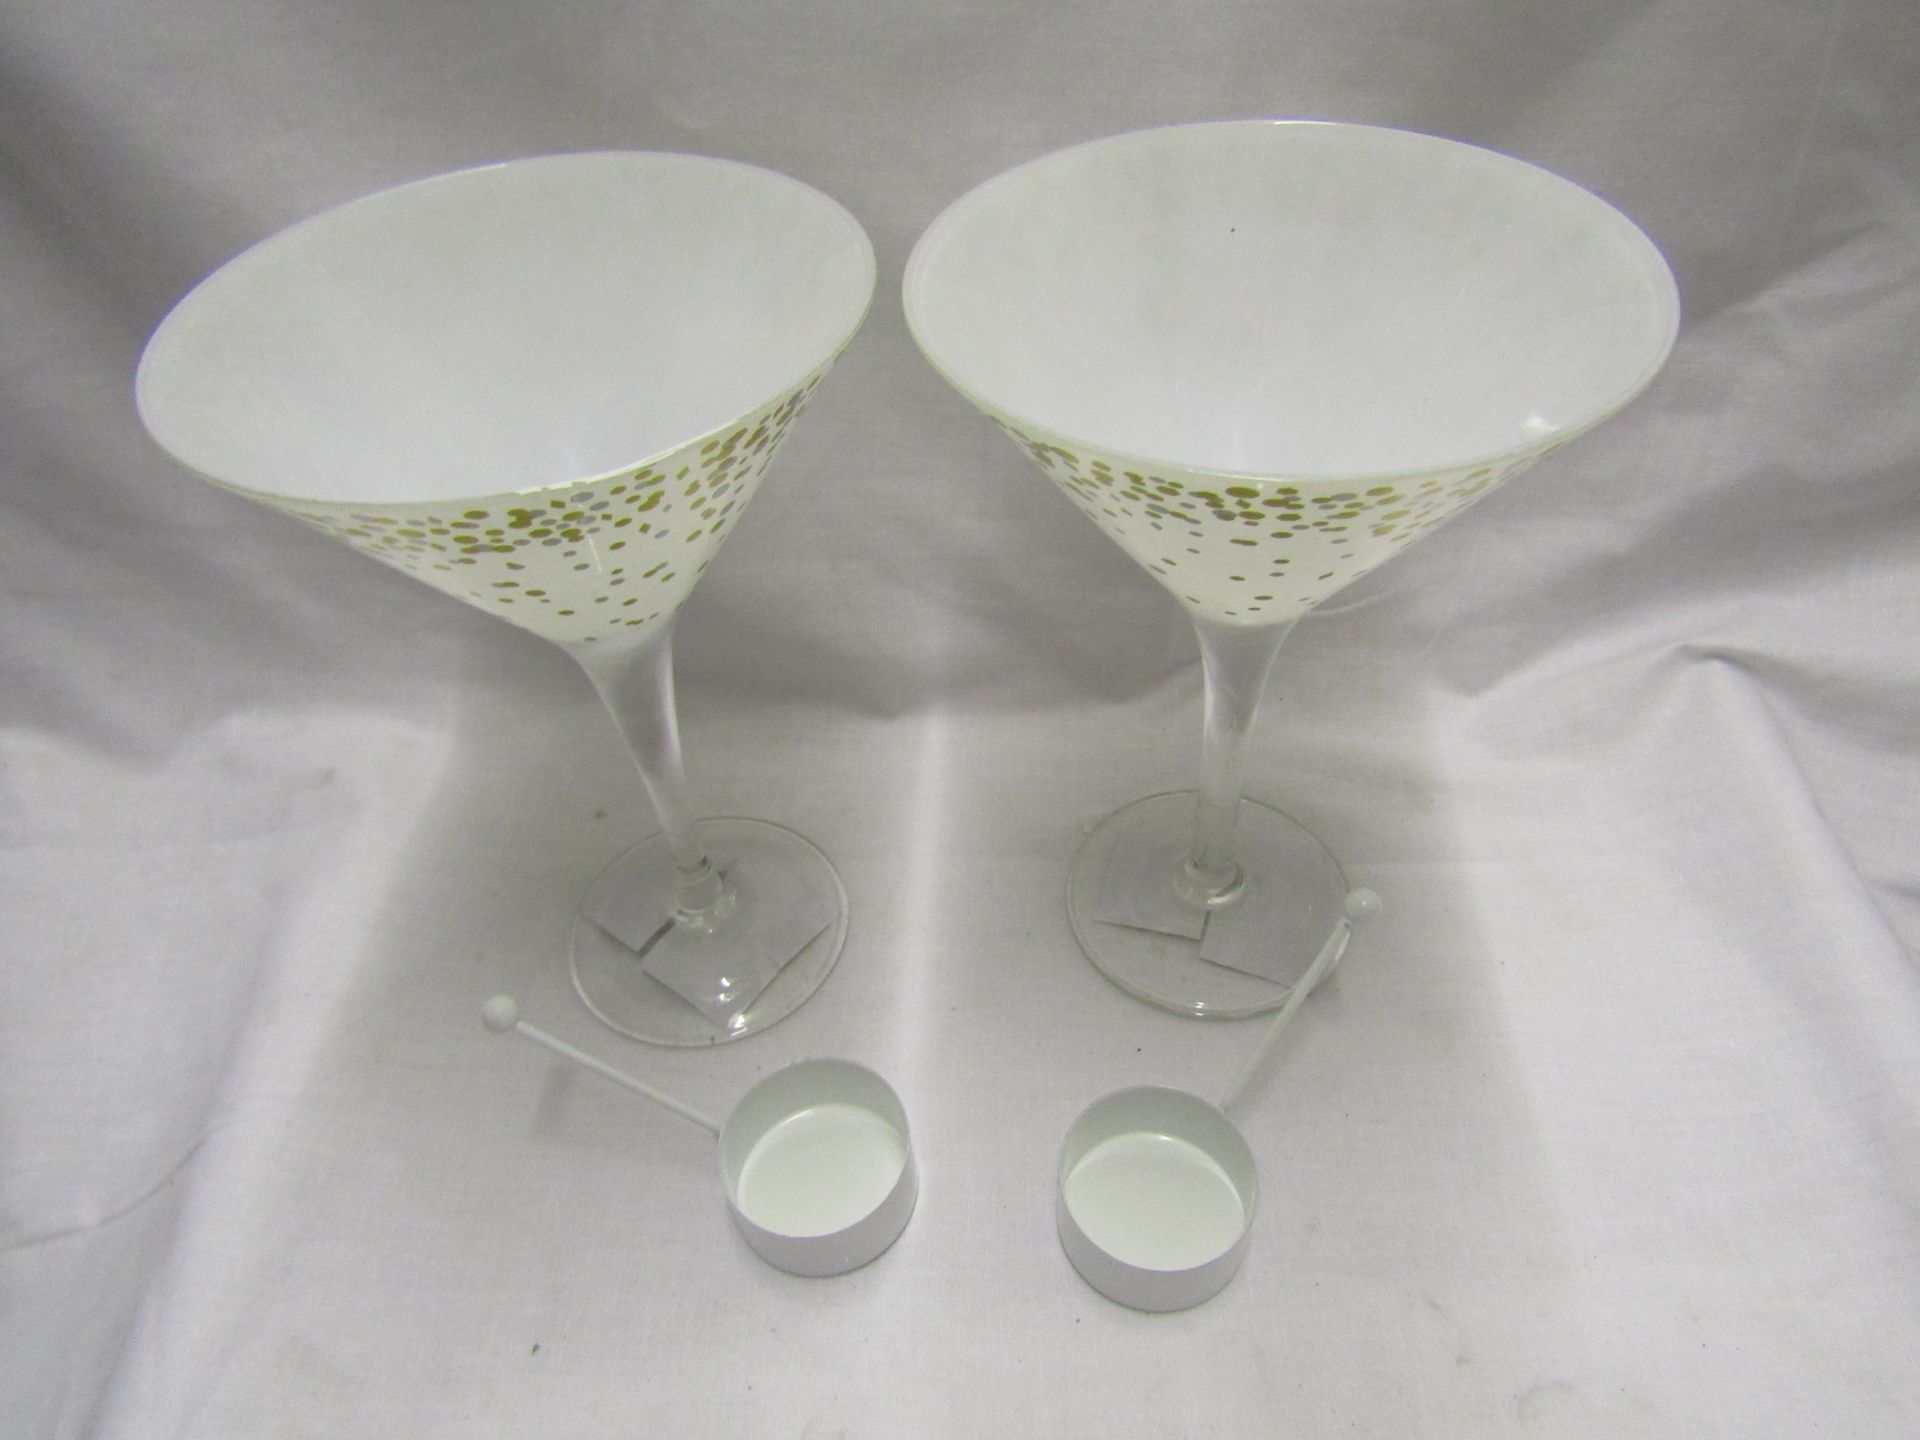 Yankee Candle 2PC Tea Light Holders ( See Image ) New & Boxed